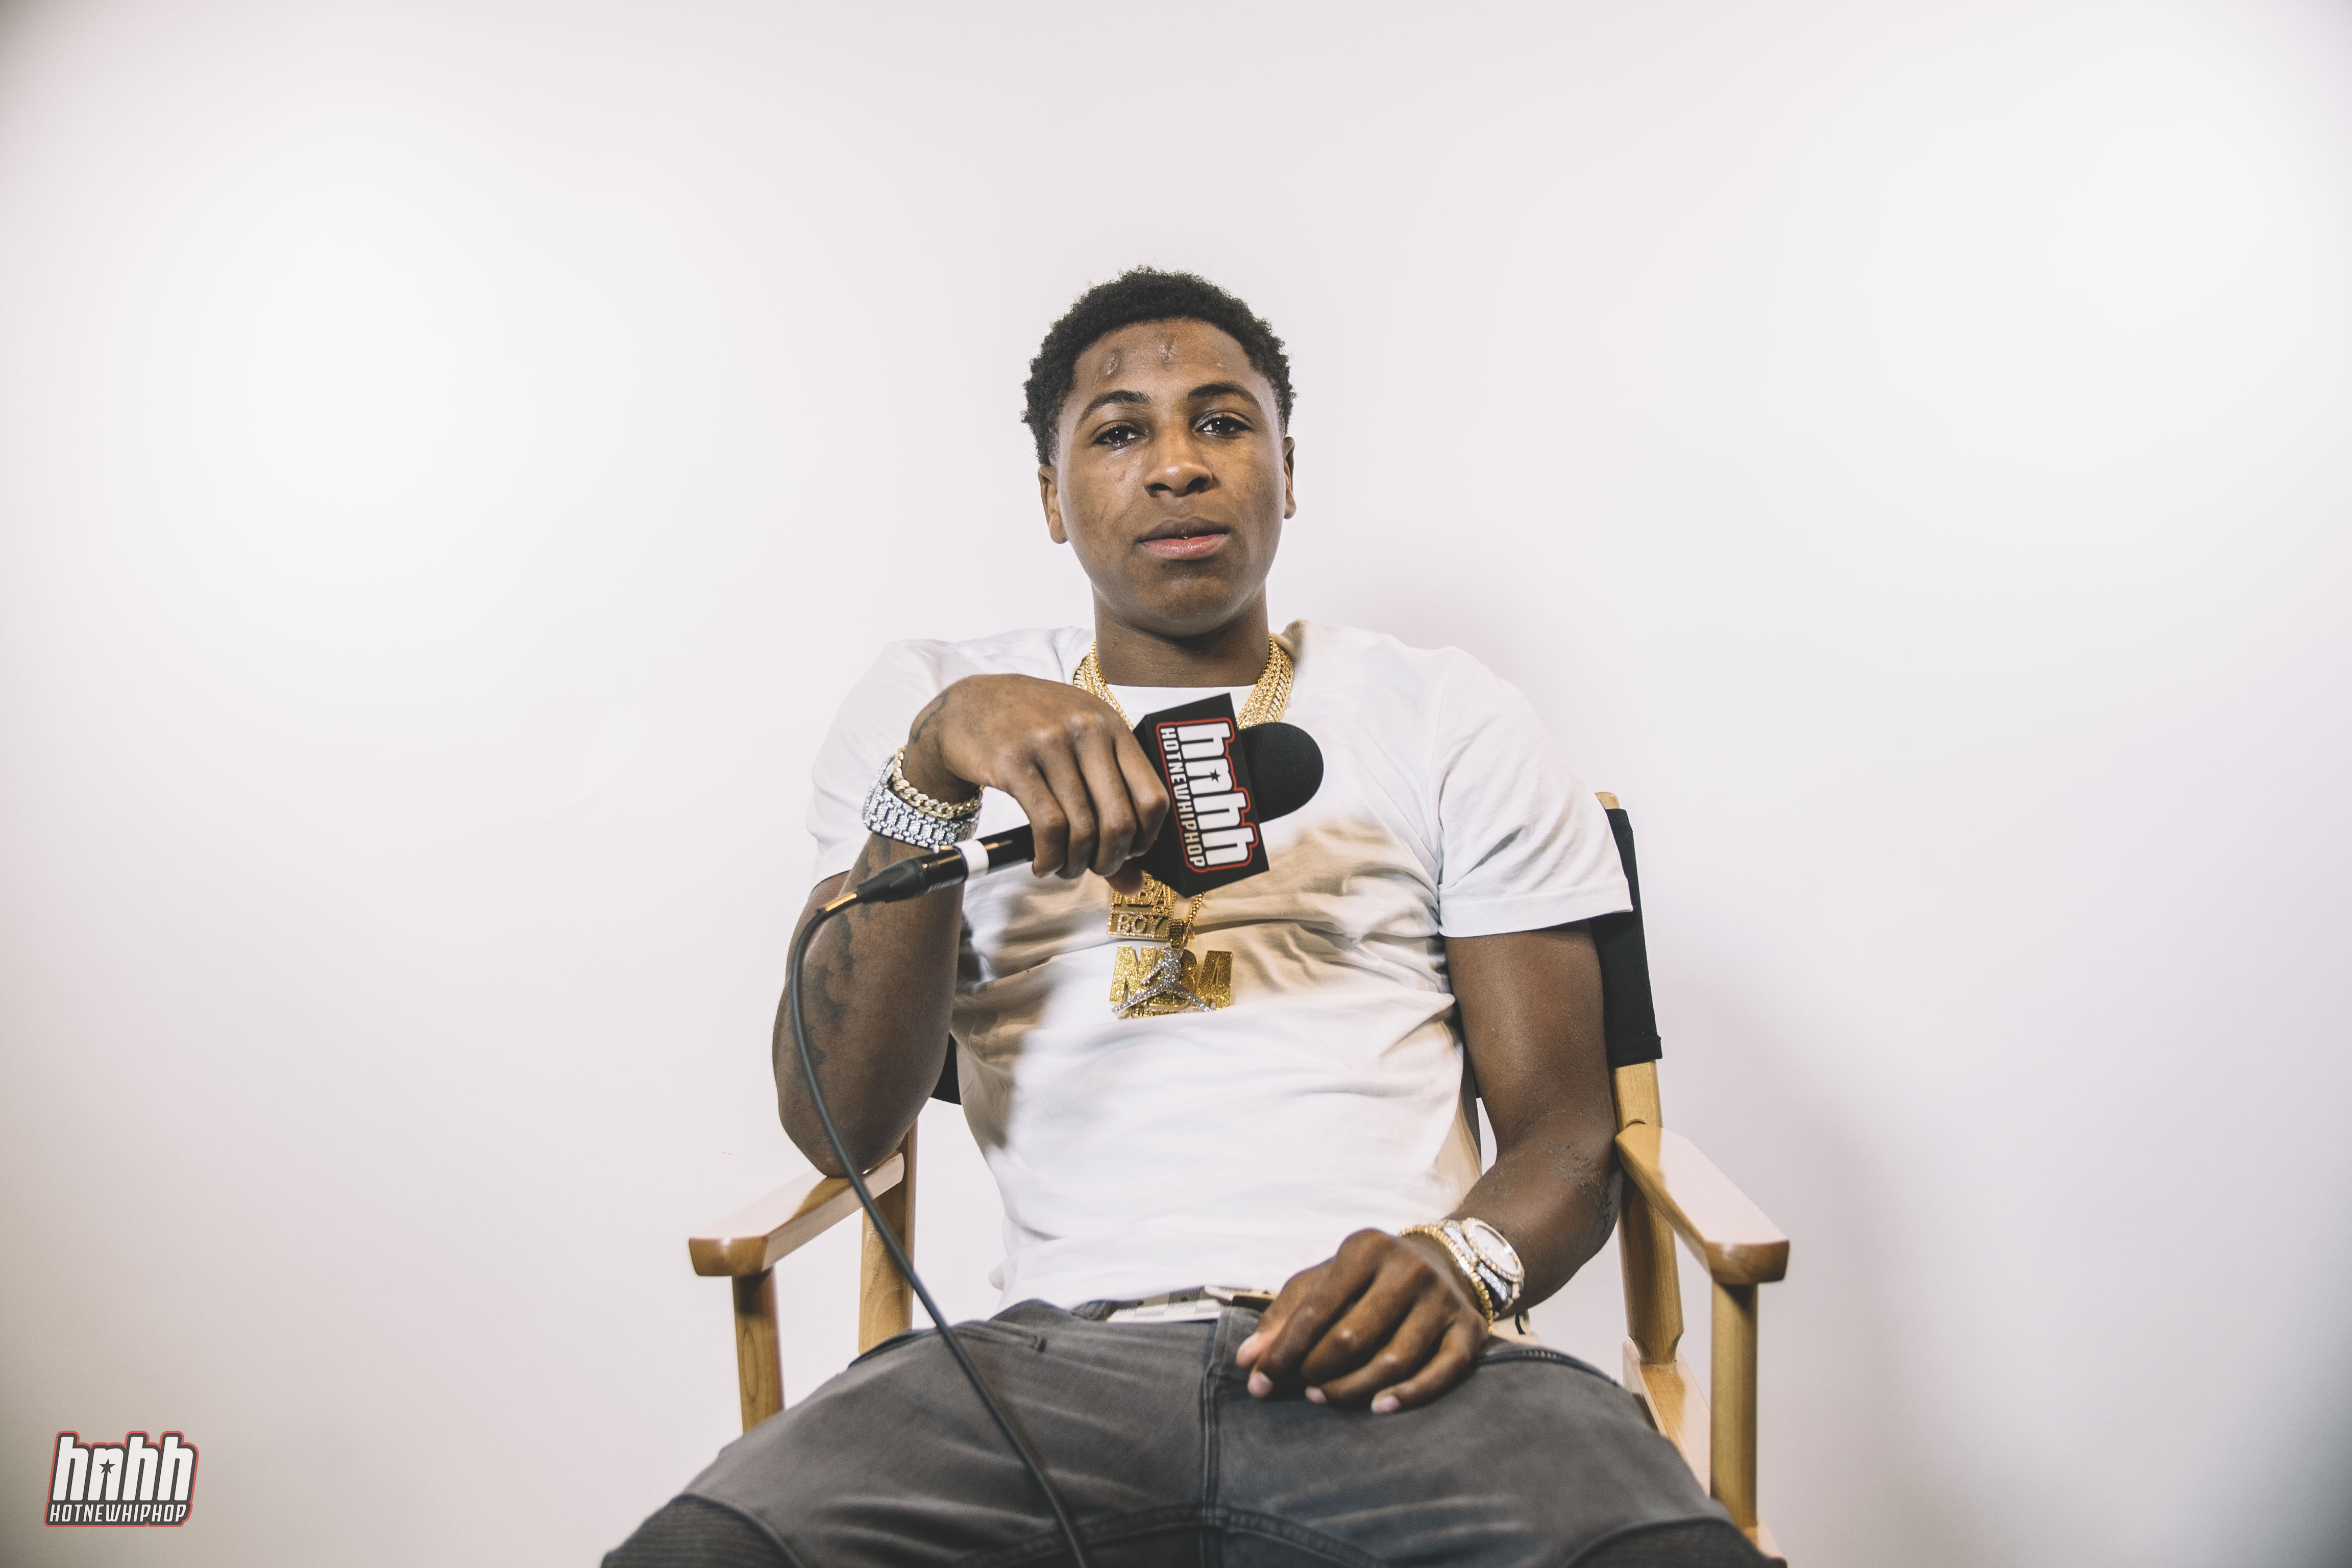 Fans Find NBA YoungBoy On Google Maps At His Louisiana Home